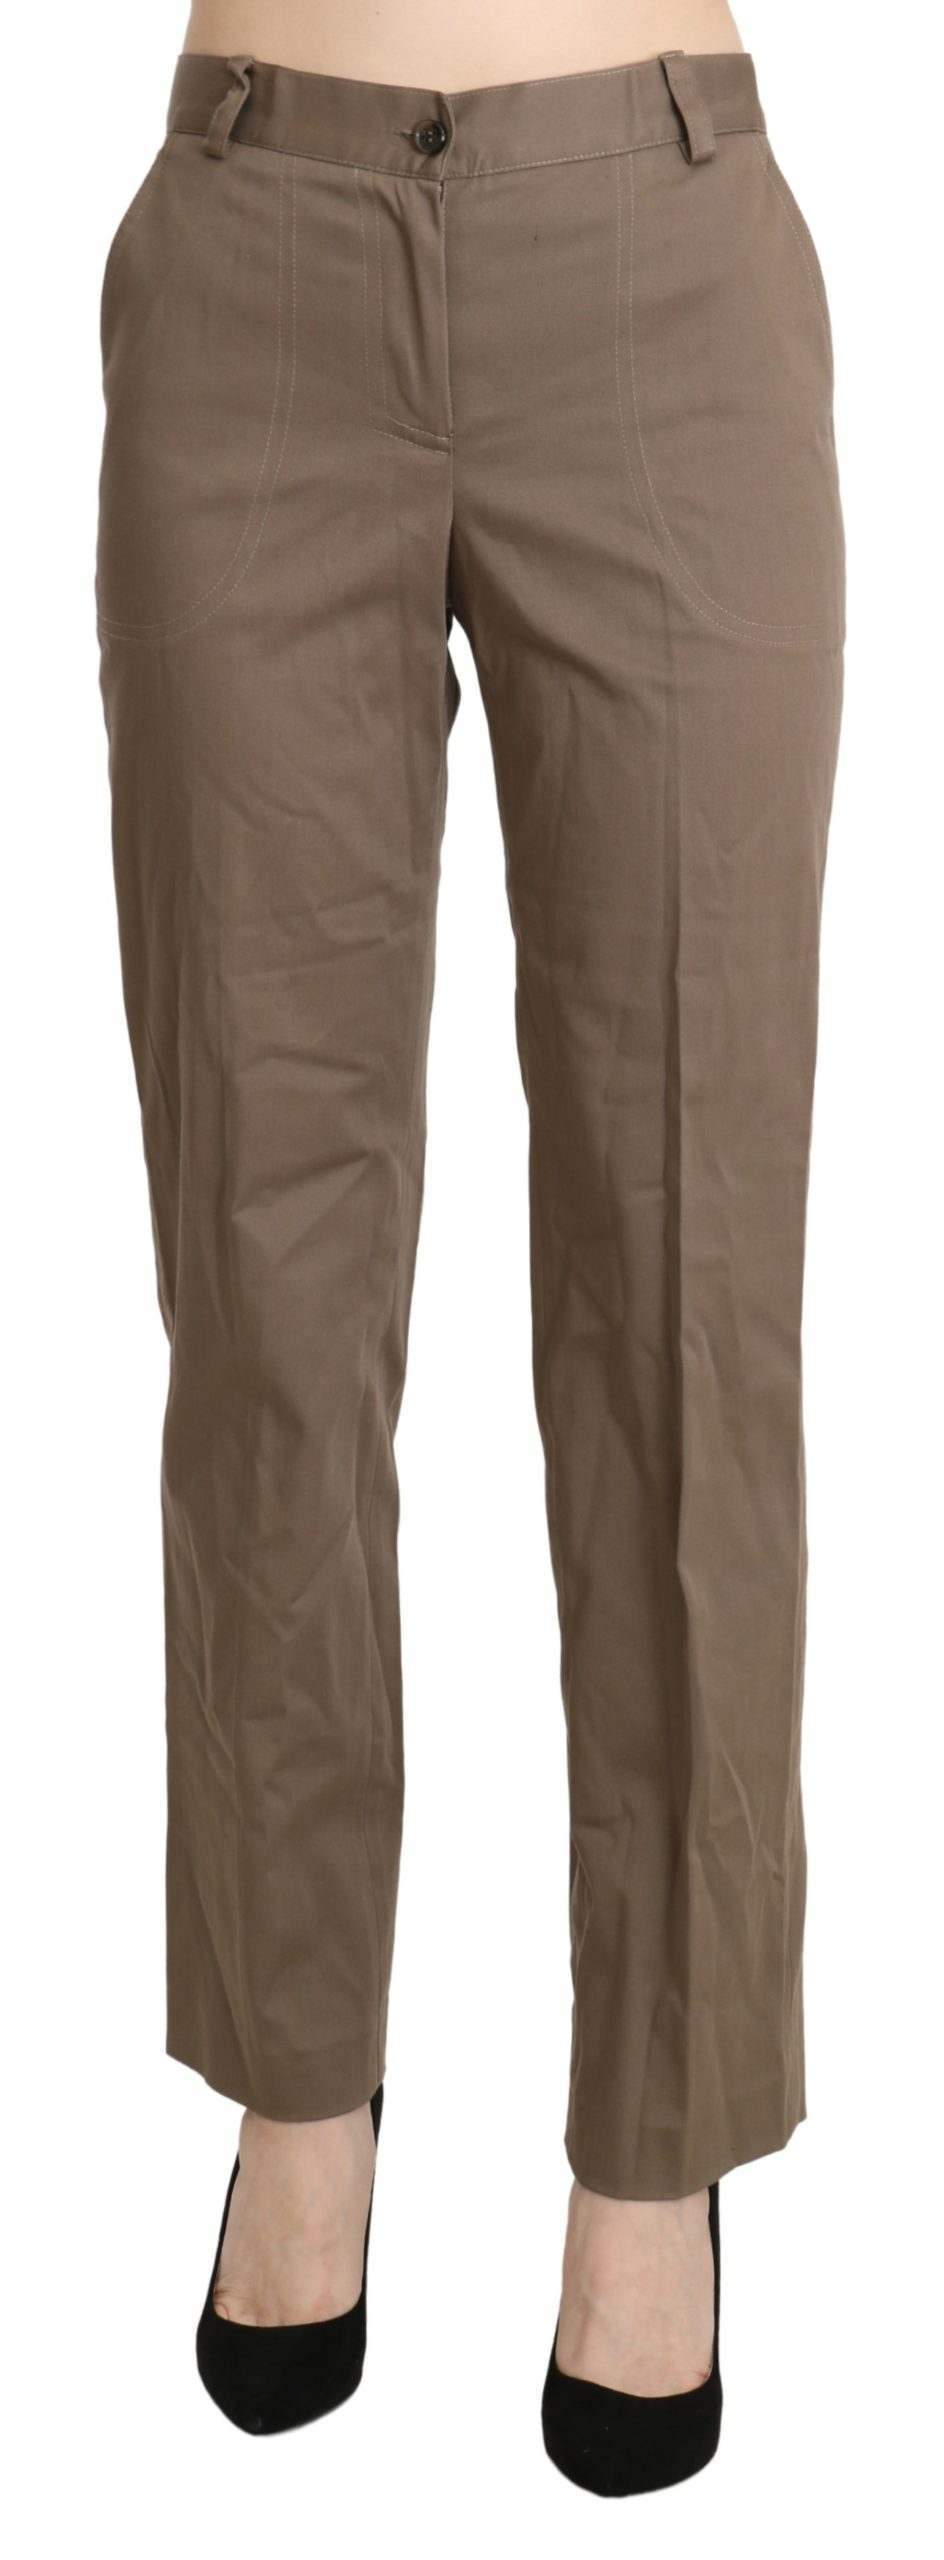 BENCIVENGA  High Waist Straight Dress Trouser Pants #women, BENCIVENGA, Brown, feed-agegroup-adult, feed-color-brown, feed-gender-female, feed-size-IT42|M, feed-size-IT44|L, feed-size-IT48|XXL, feed-size-IT50|3XL, Gender_Women, IT42|M, IT44|L, IT48|XXL, IT50|3XL, Jeans & Pants - Women - Clothing, Women - New Arrivals at SEYMAYKA